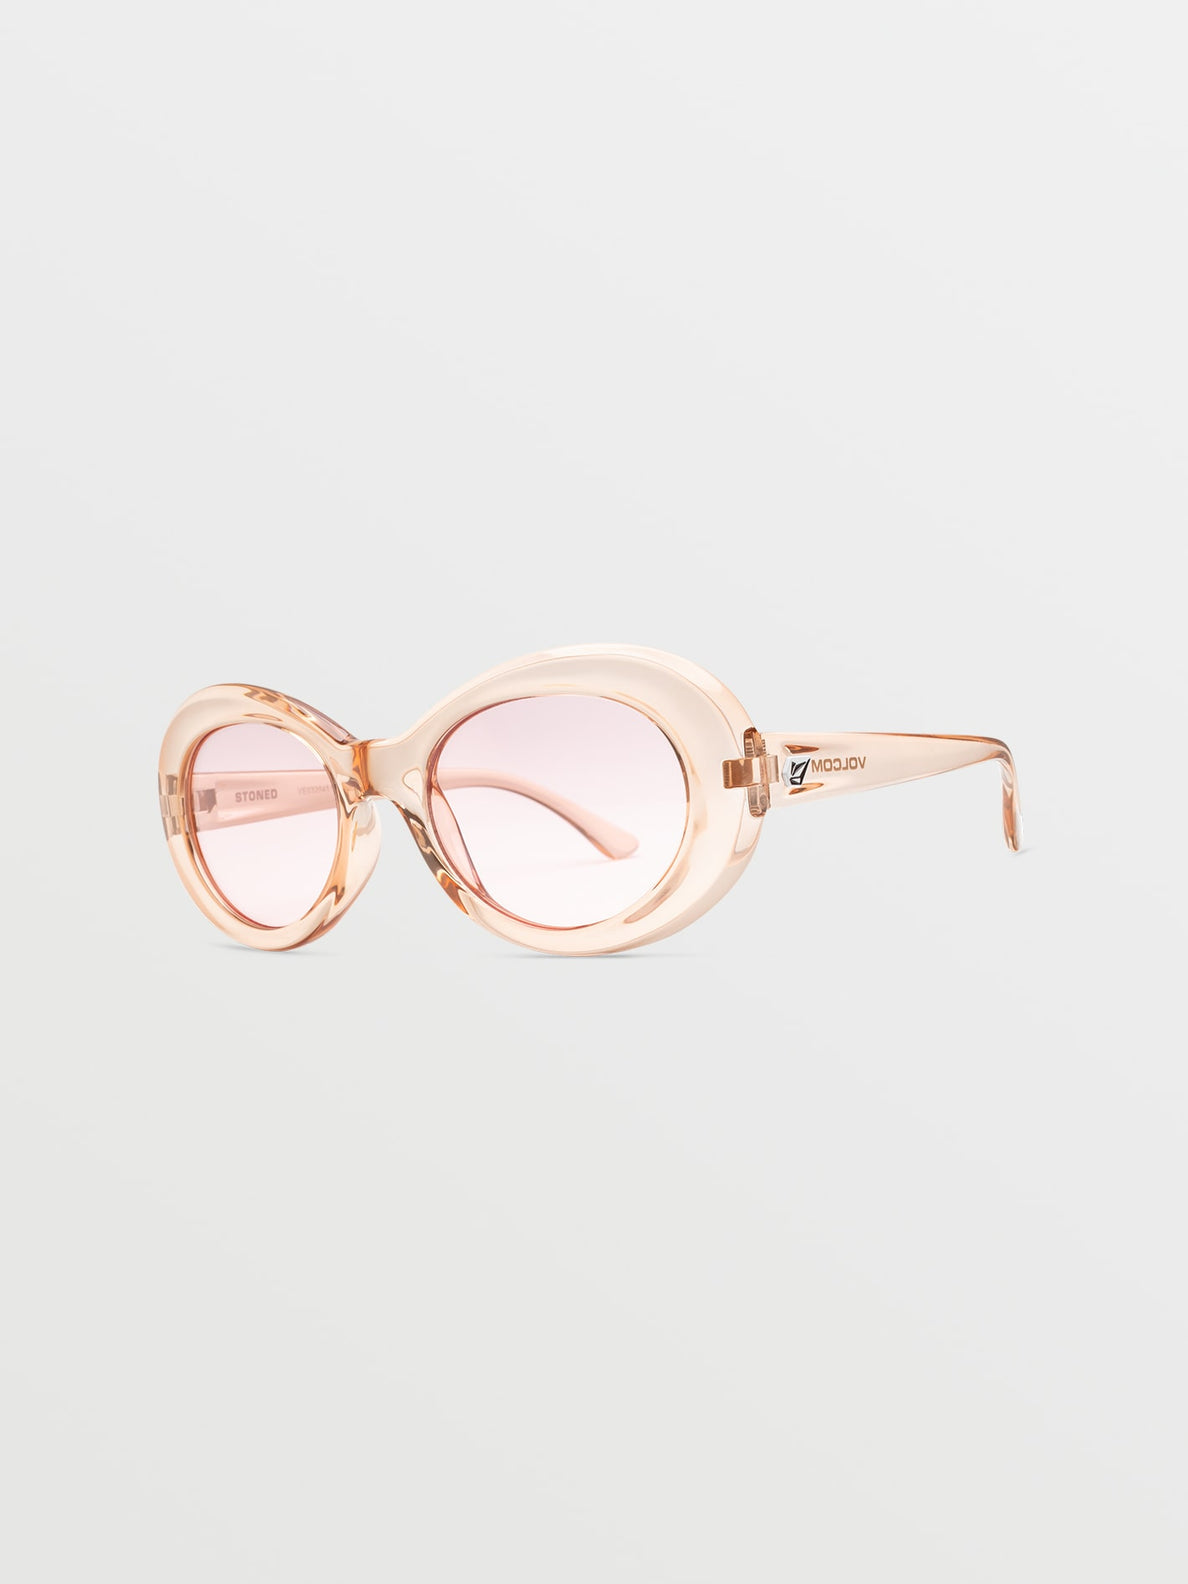 Stoned Sunglasses - Gloss Quail Feather/Pink (VE03204511_FTH) [B]